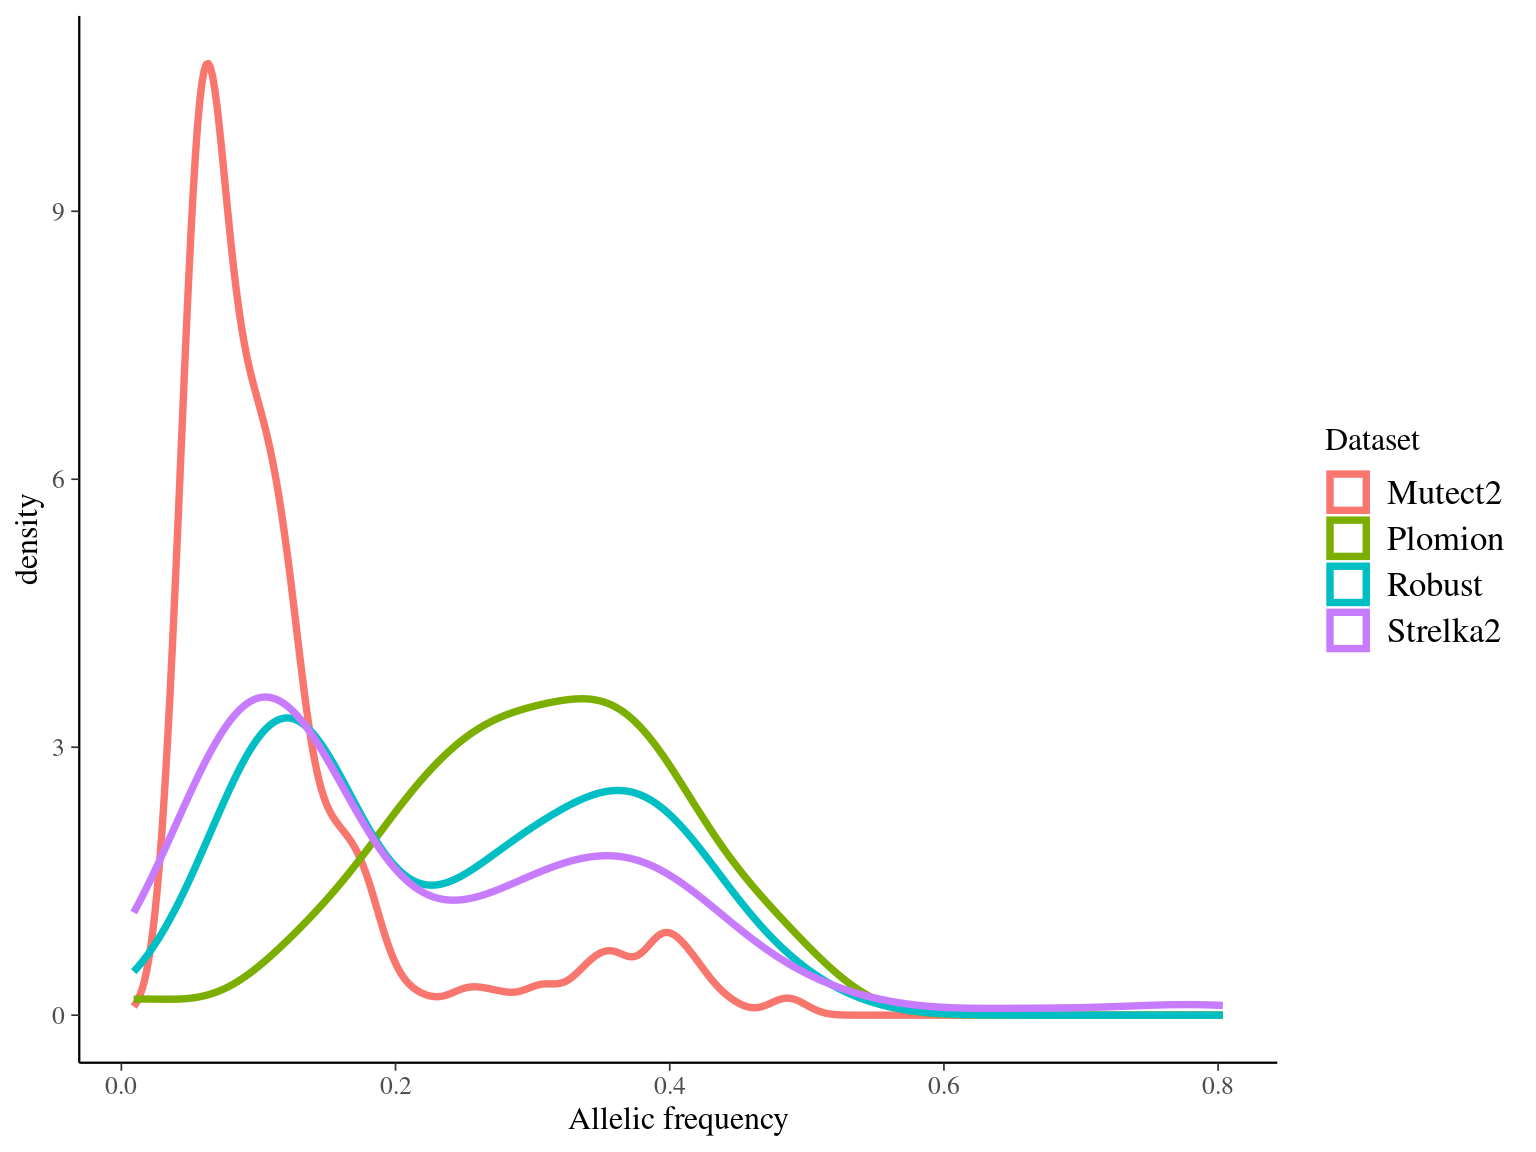 Allele frequency for the different datasets.